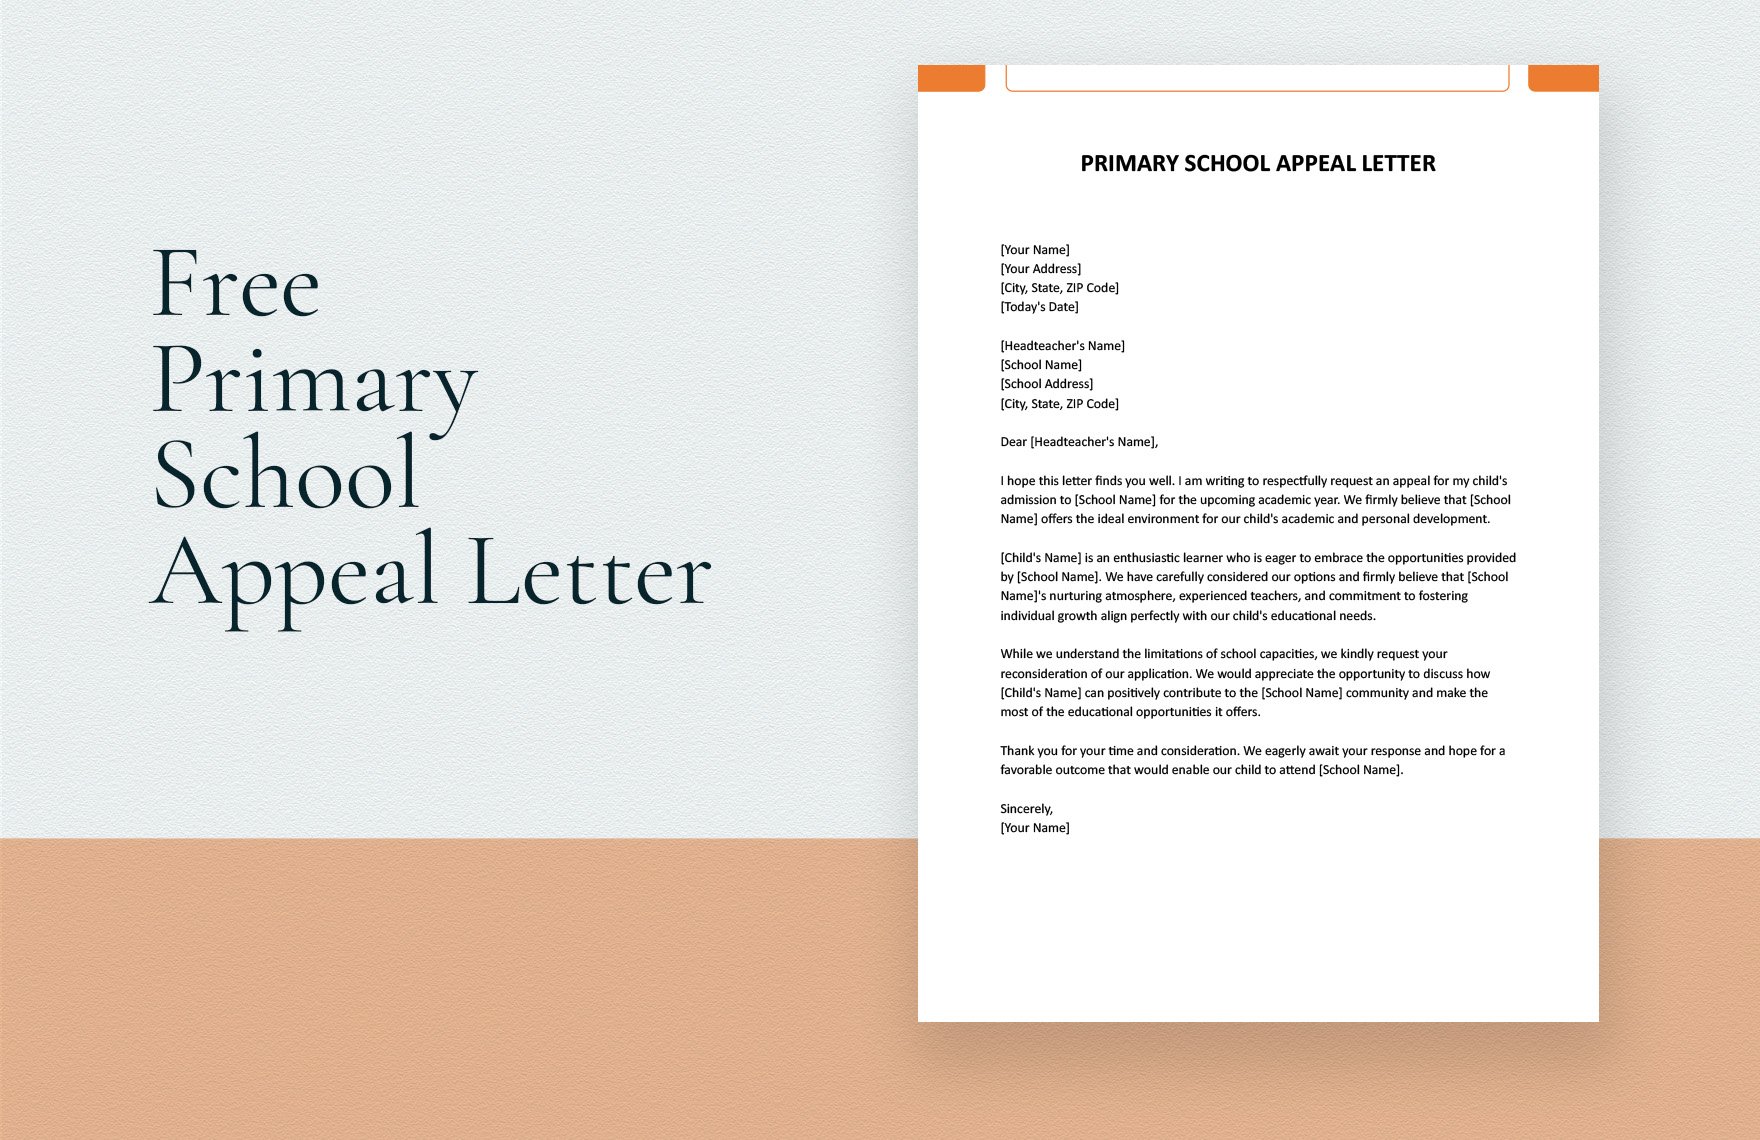 Primary School Appeal Letter